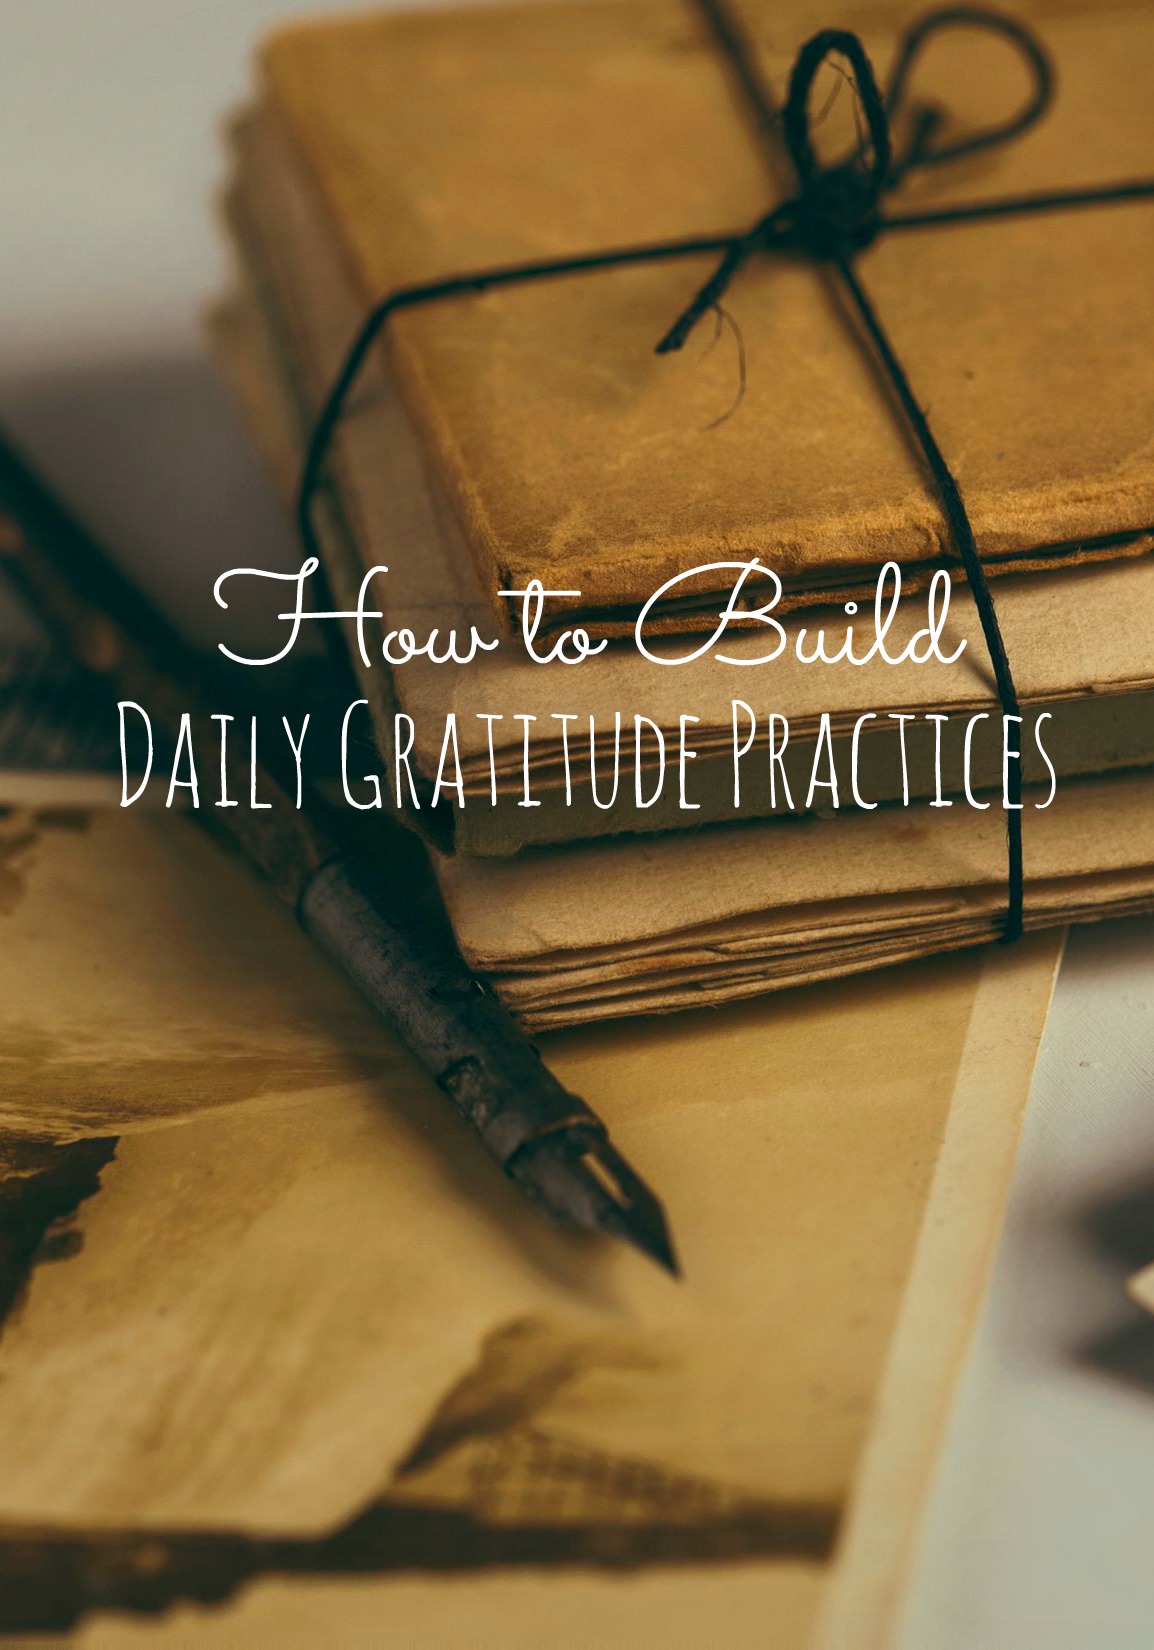 how to build daily gratitude practices